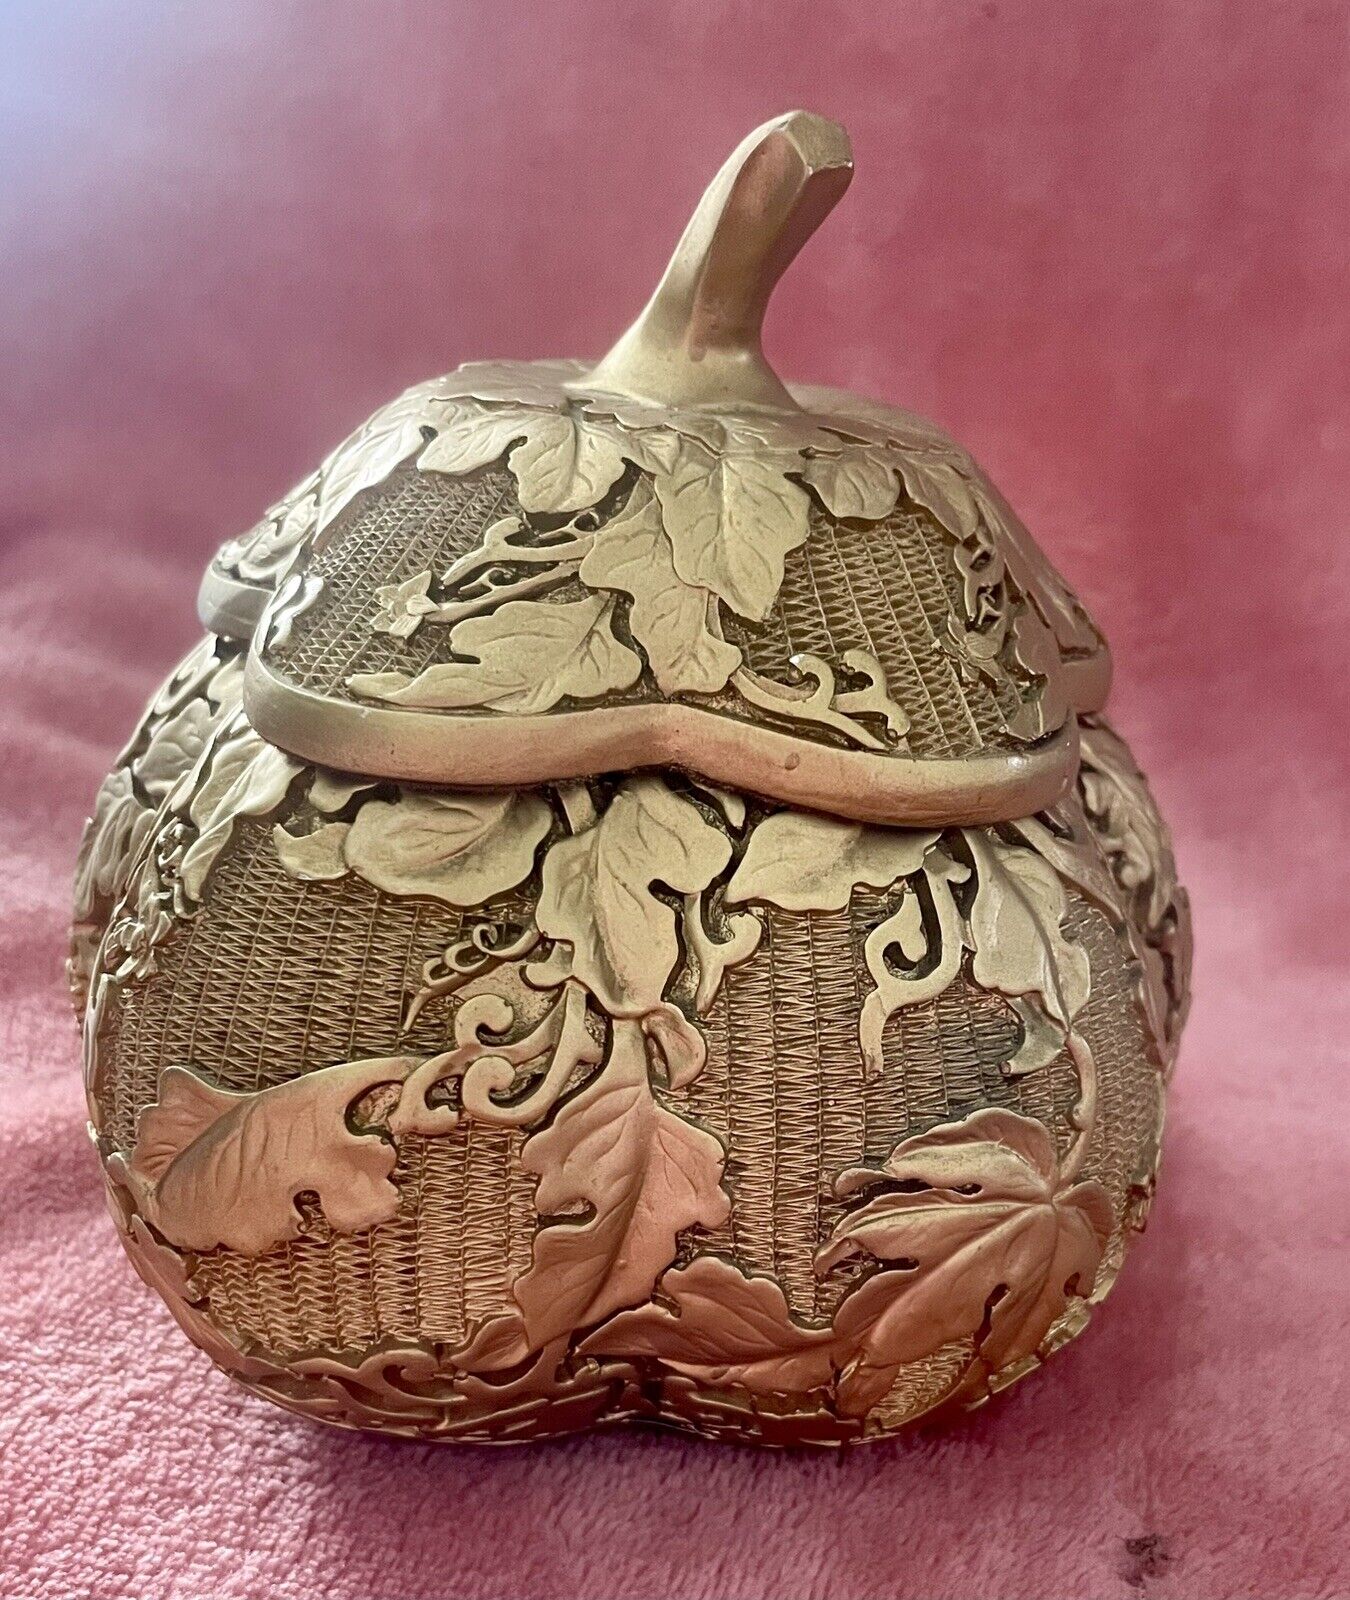 Vintage Ivory Dynasty Resin Carved Lined Jewelry/Trinket/Candy Box Pumpkin Gourd